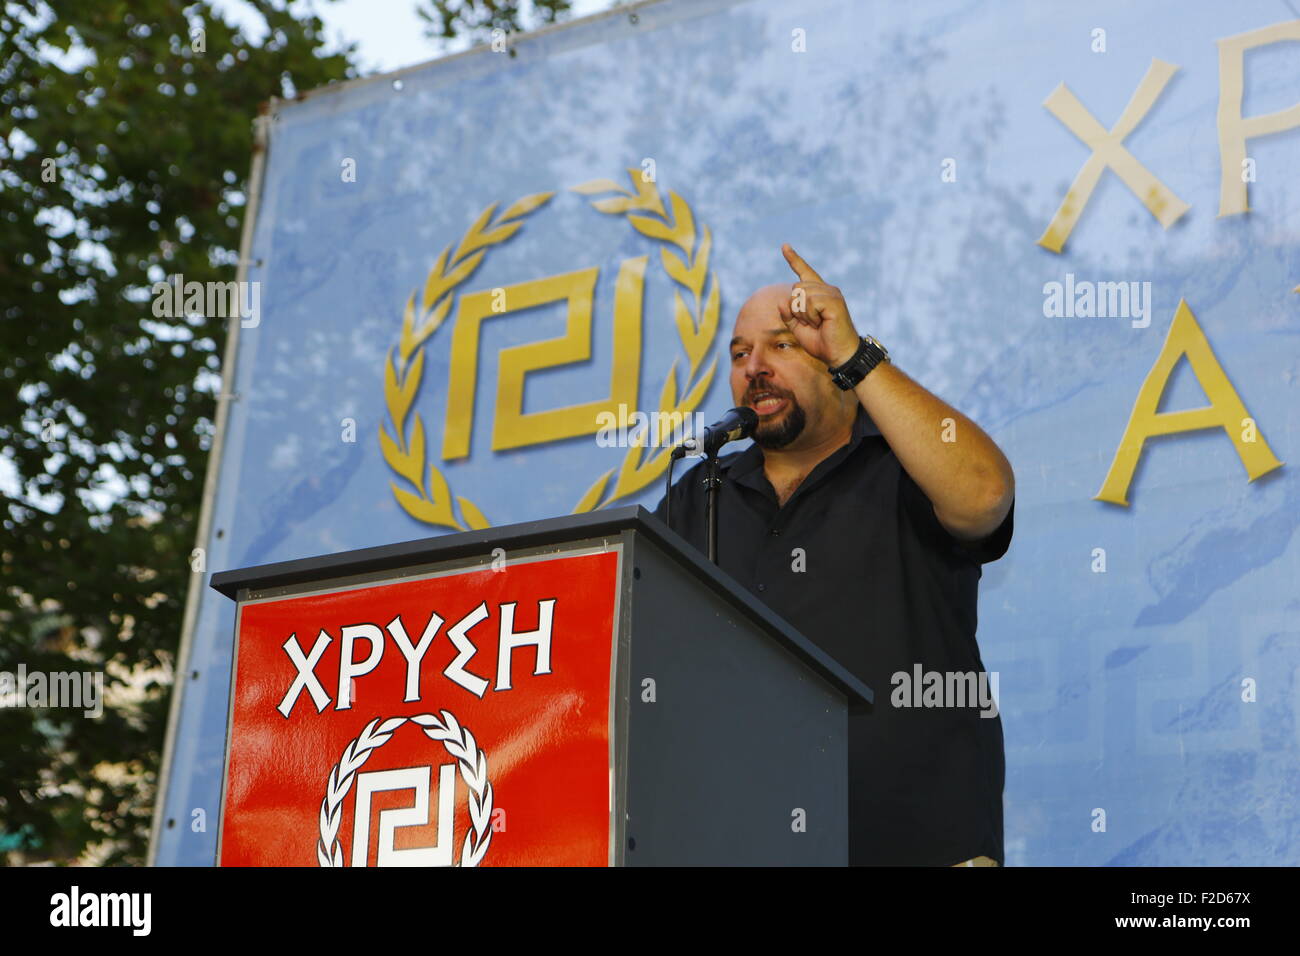 Athens, Greece. 16th Sep, 2015. Golden Dawn MP (Member of Parliament) Ilias Panagiotaros addresses the election rally. Greek right wing party Golden Dawn held an election rally in Athens, four days ahead of election day. The party hopes to gain enough seats in the election to become the third latest party in the Greek Parliament. Credit:  Michael Debets/Pacific Press/Alamy Live News Stock Photo